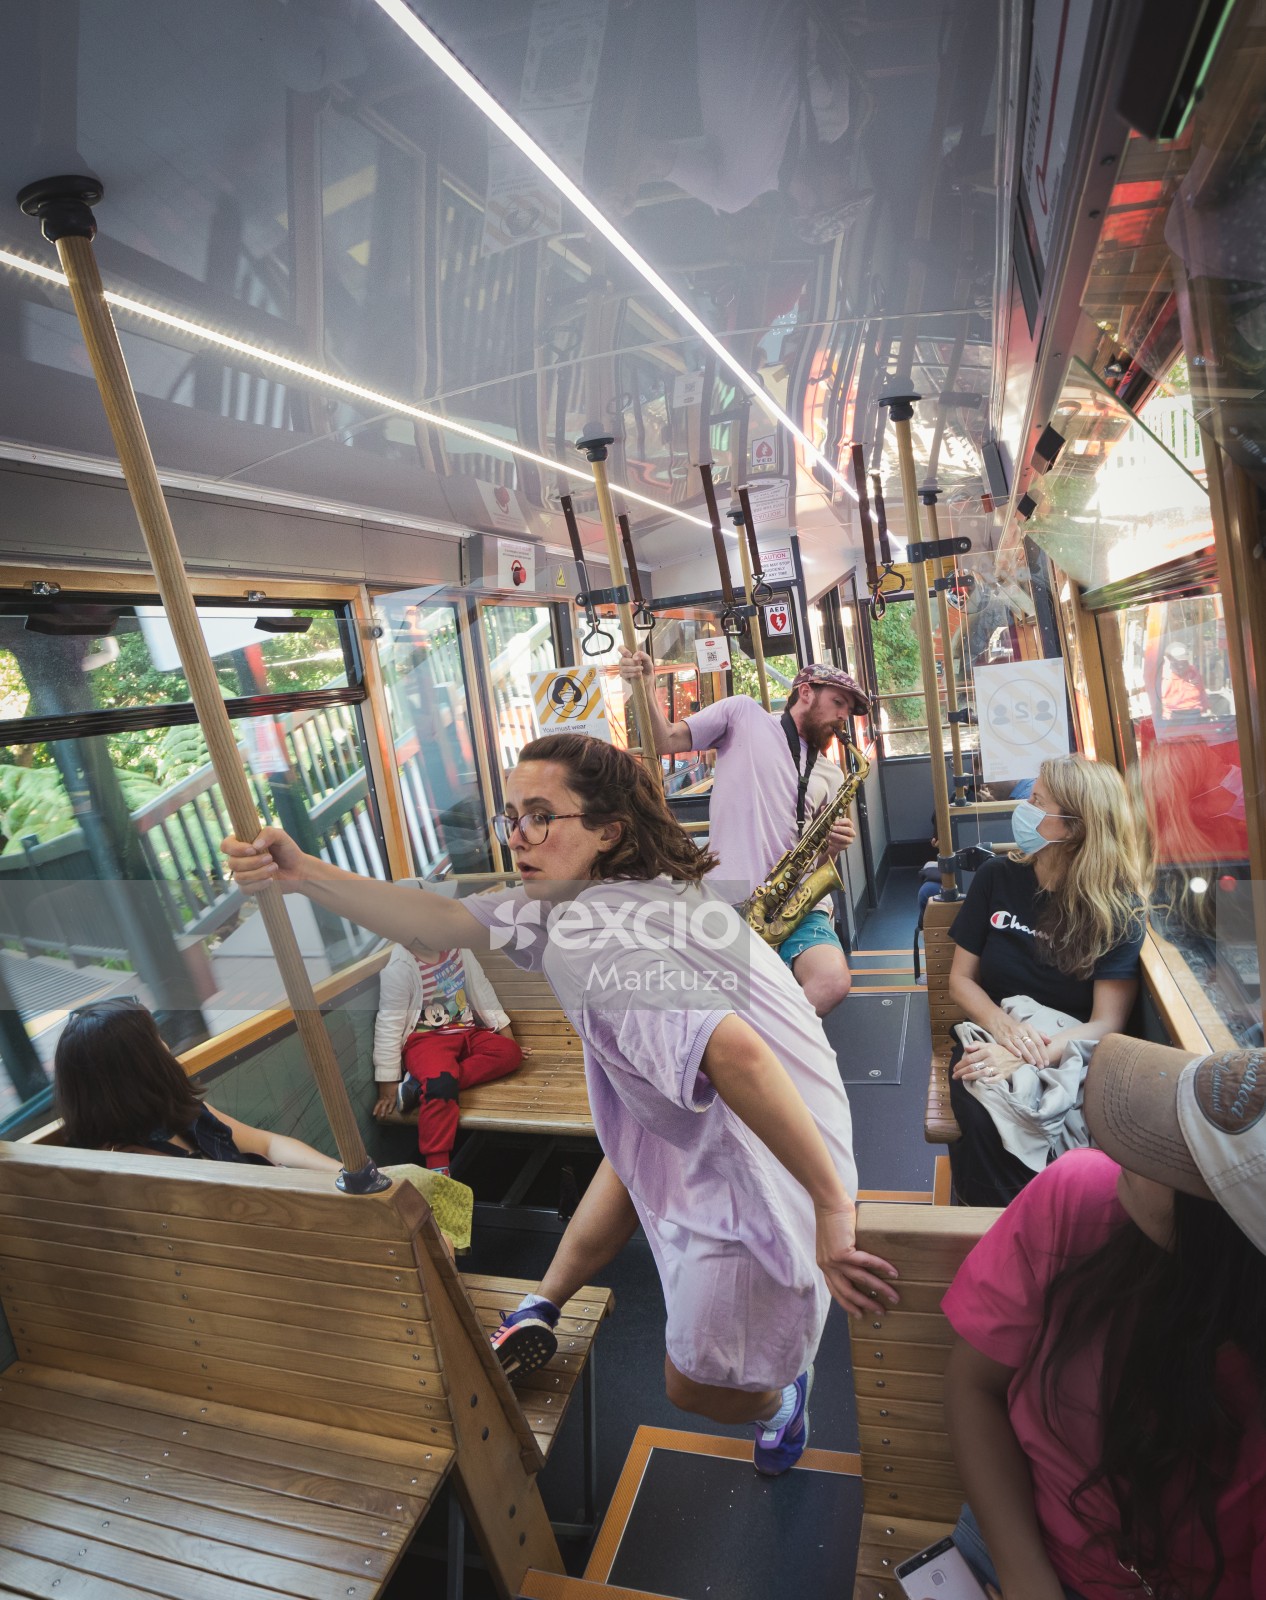 Woman dancing and man playing saxophone in a cable car